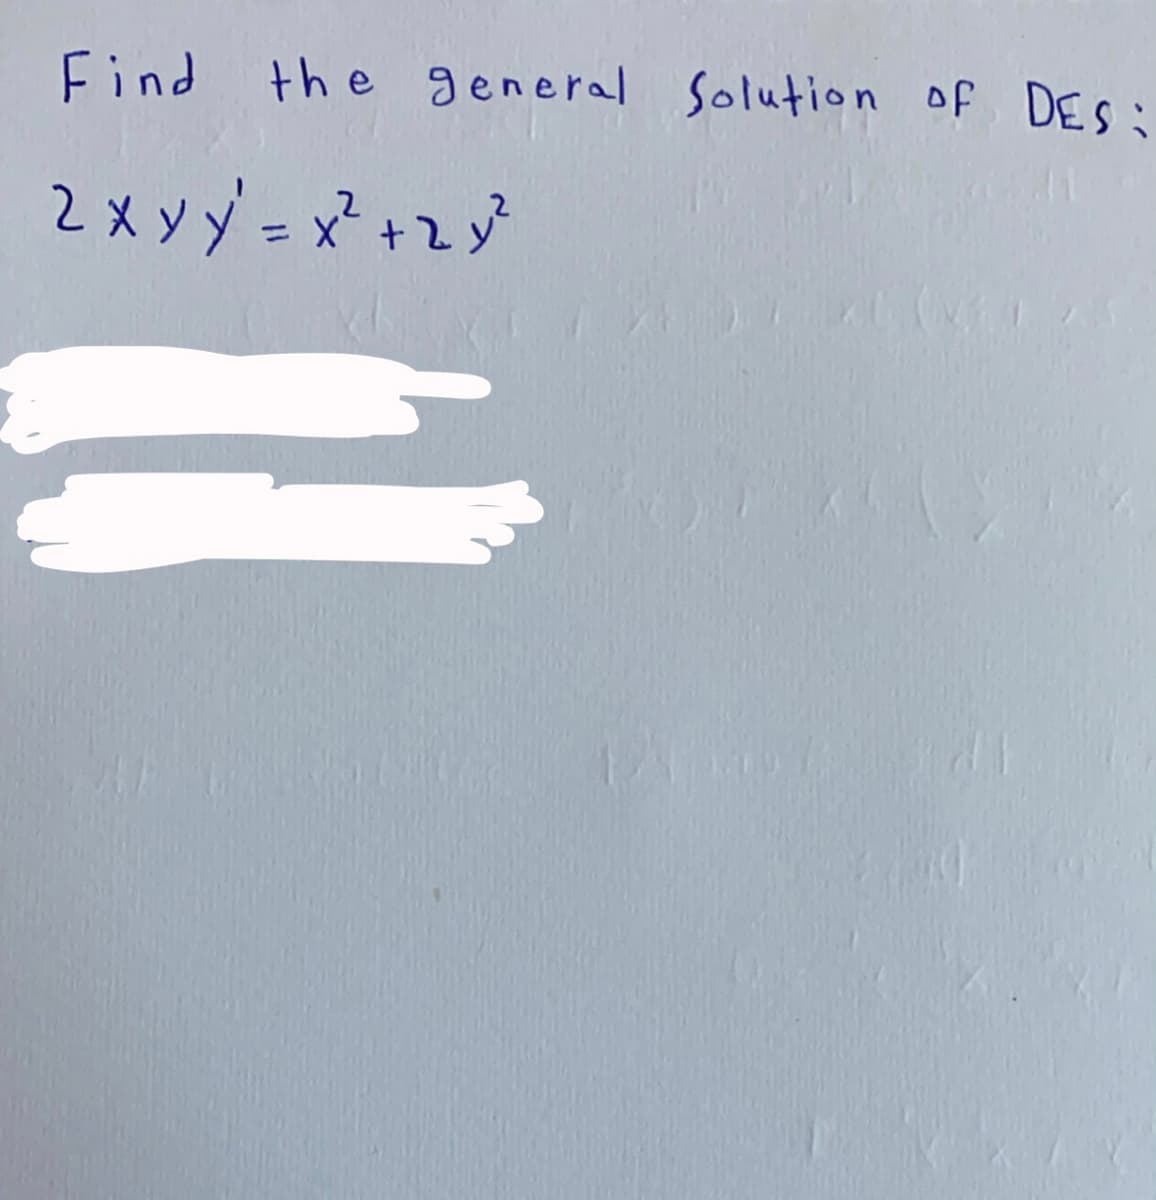 Find the general Solution of DES :
2x yy' = x² +2y
